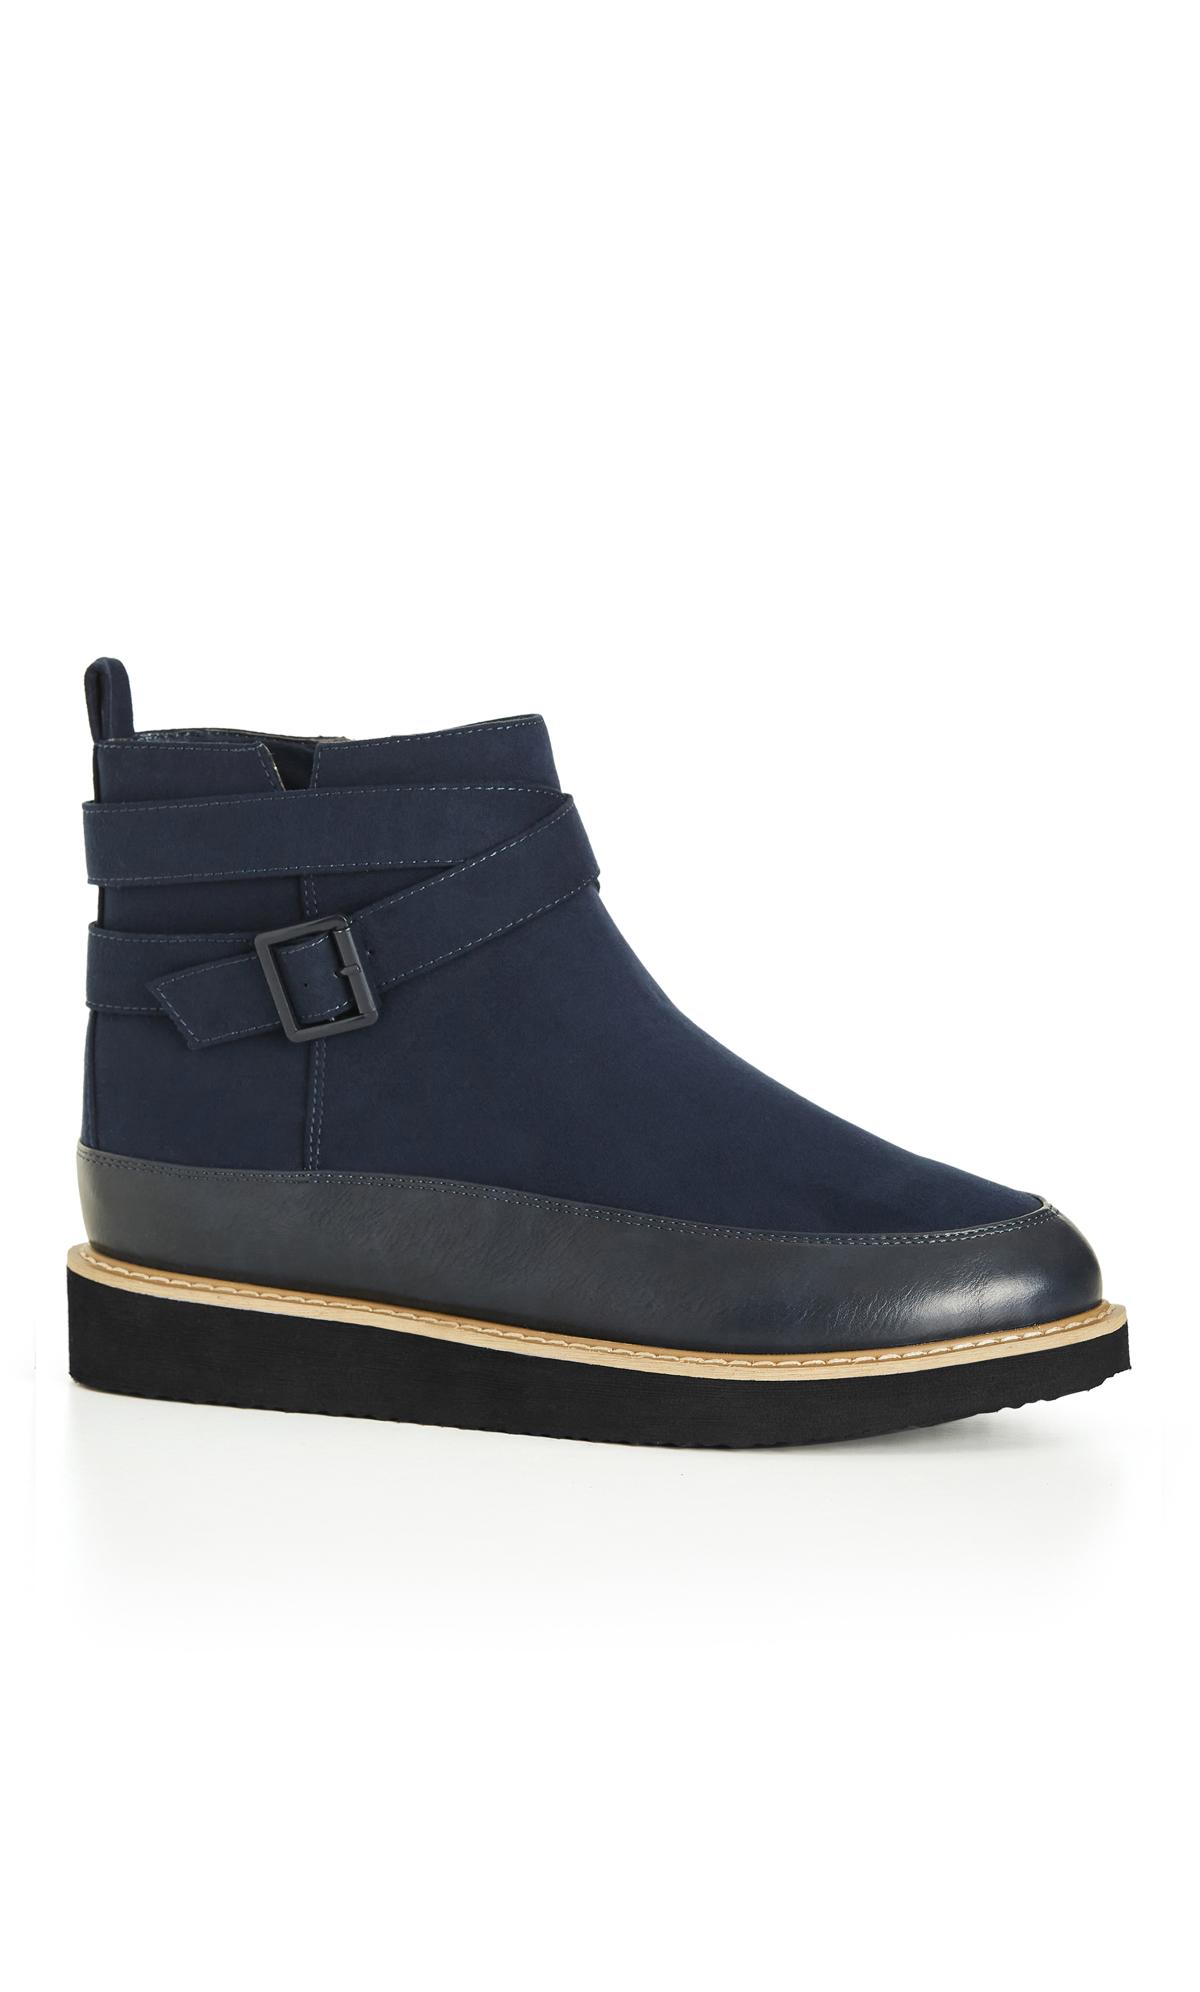 Evans Navy WIDE FIT Scarlett Ankle Boot 2